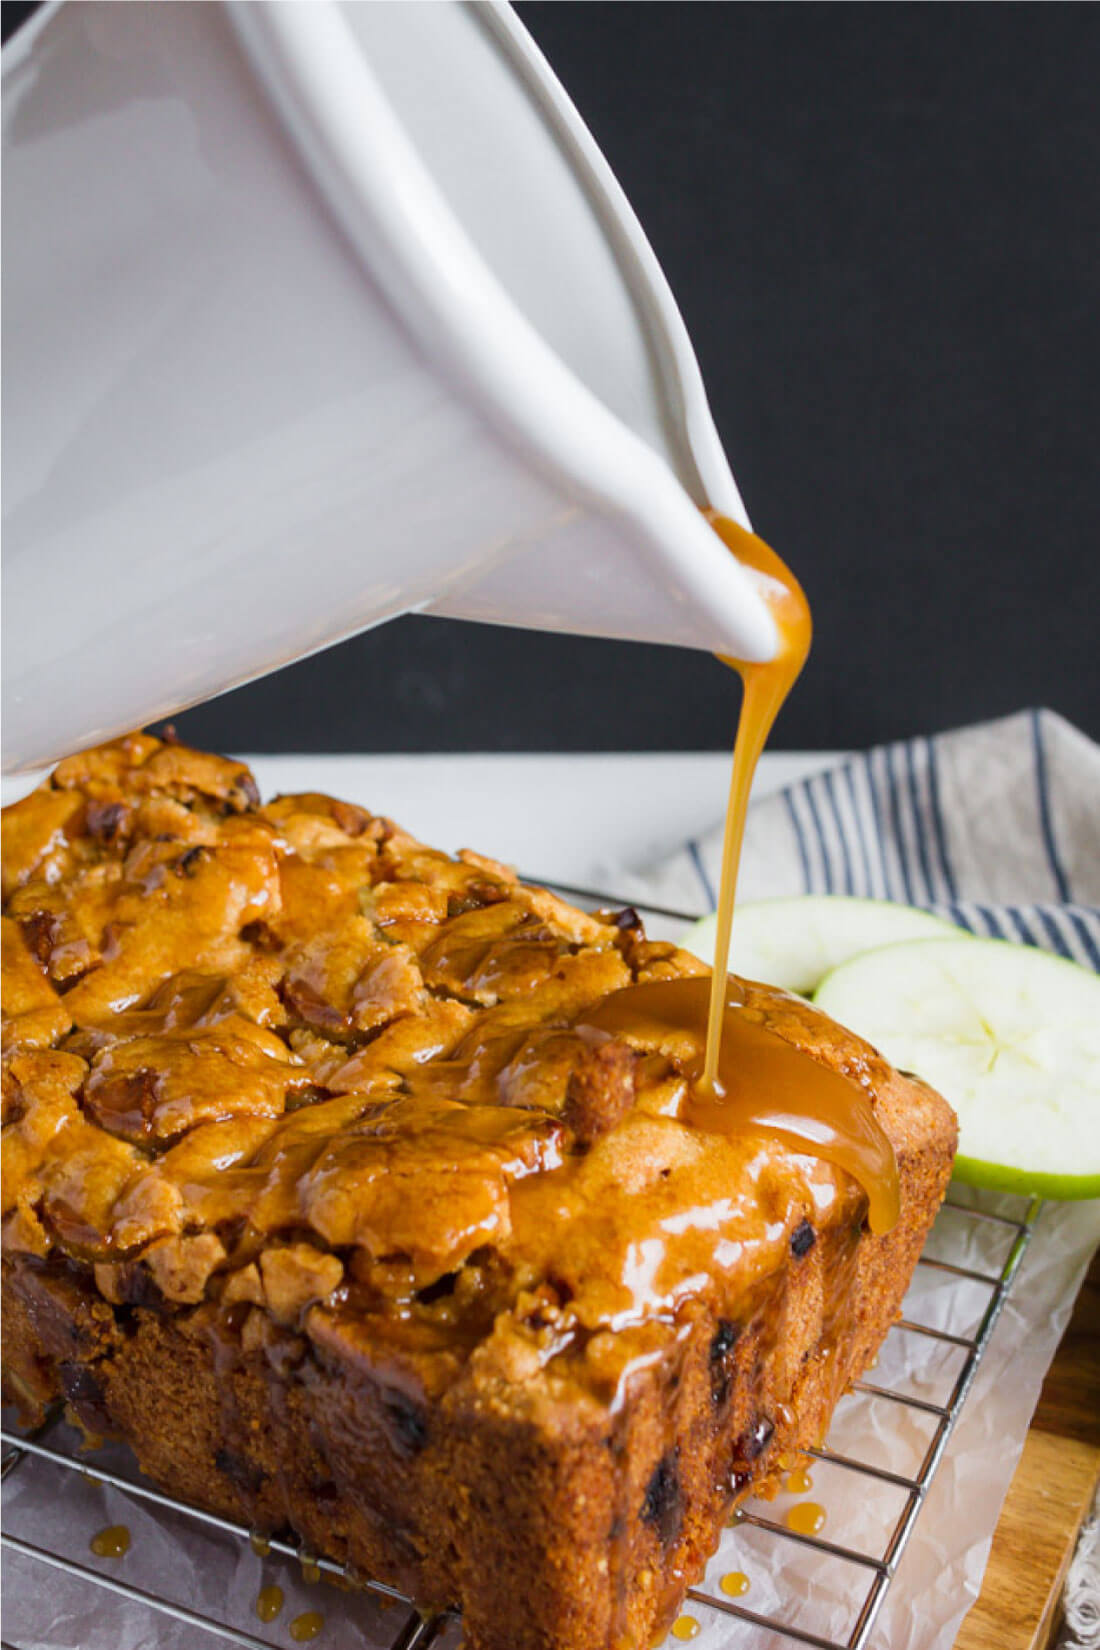 Apple Cake with a delicious caramel topping - make this apple cake recipe and you'll fall in love with it. Perfect for fall! www.thirtyhandmadedays.com